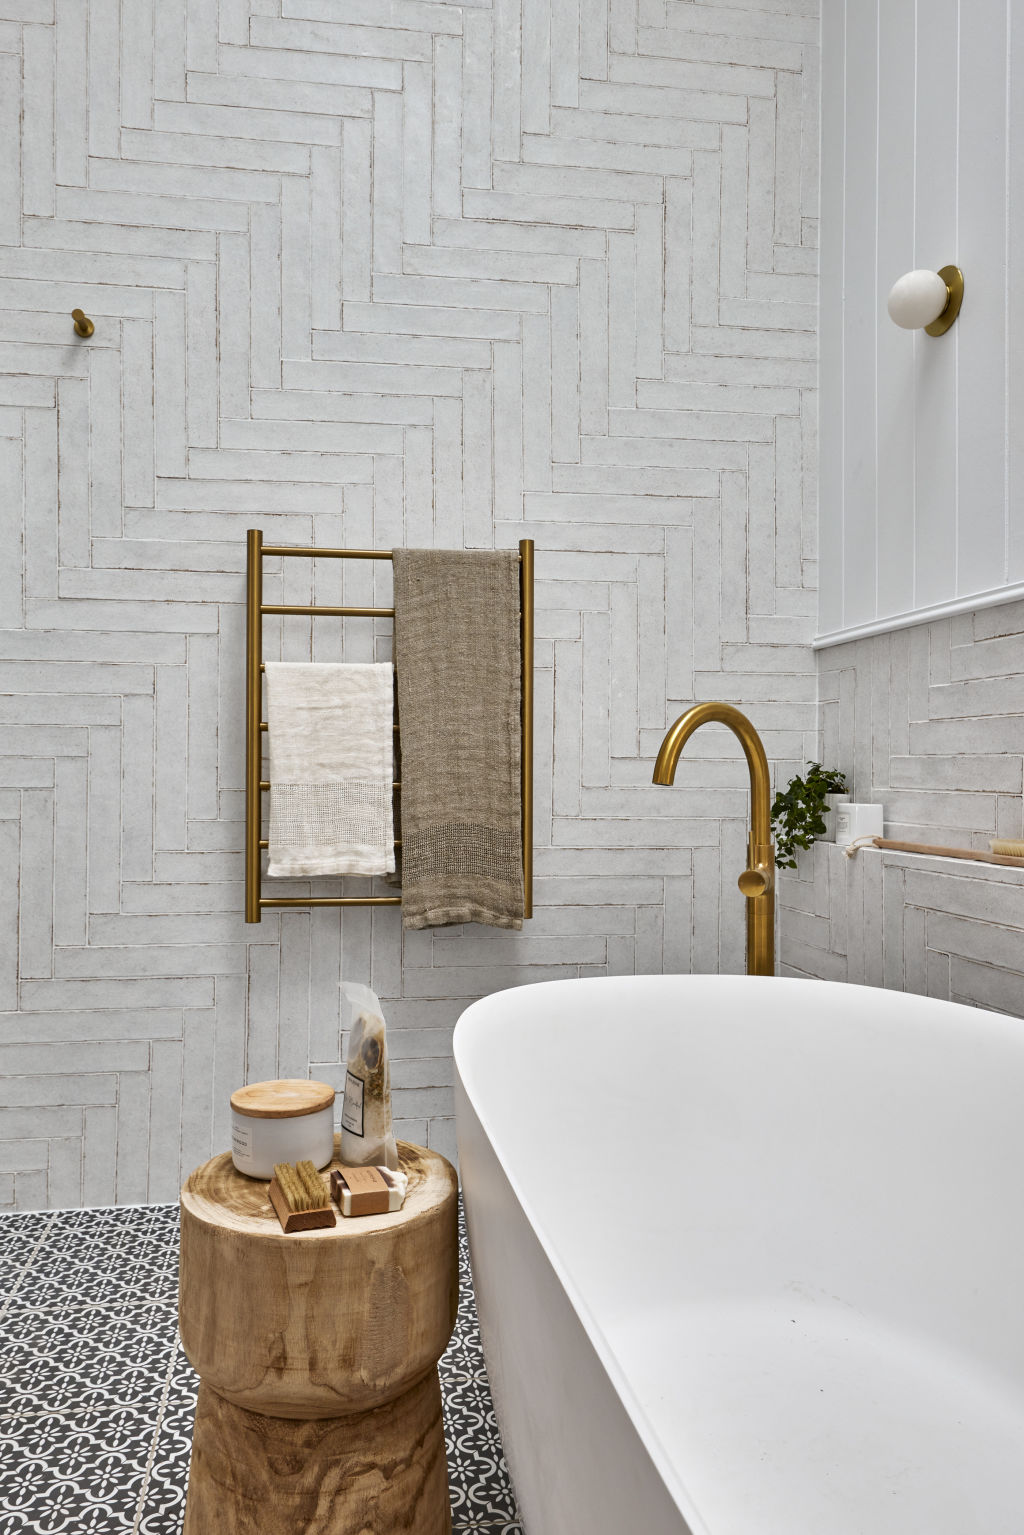 Combining wall tiles and heavily patterned floor tiles is a great way to mix and match without overwhelming the space. Photo: Supplied